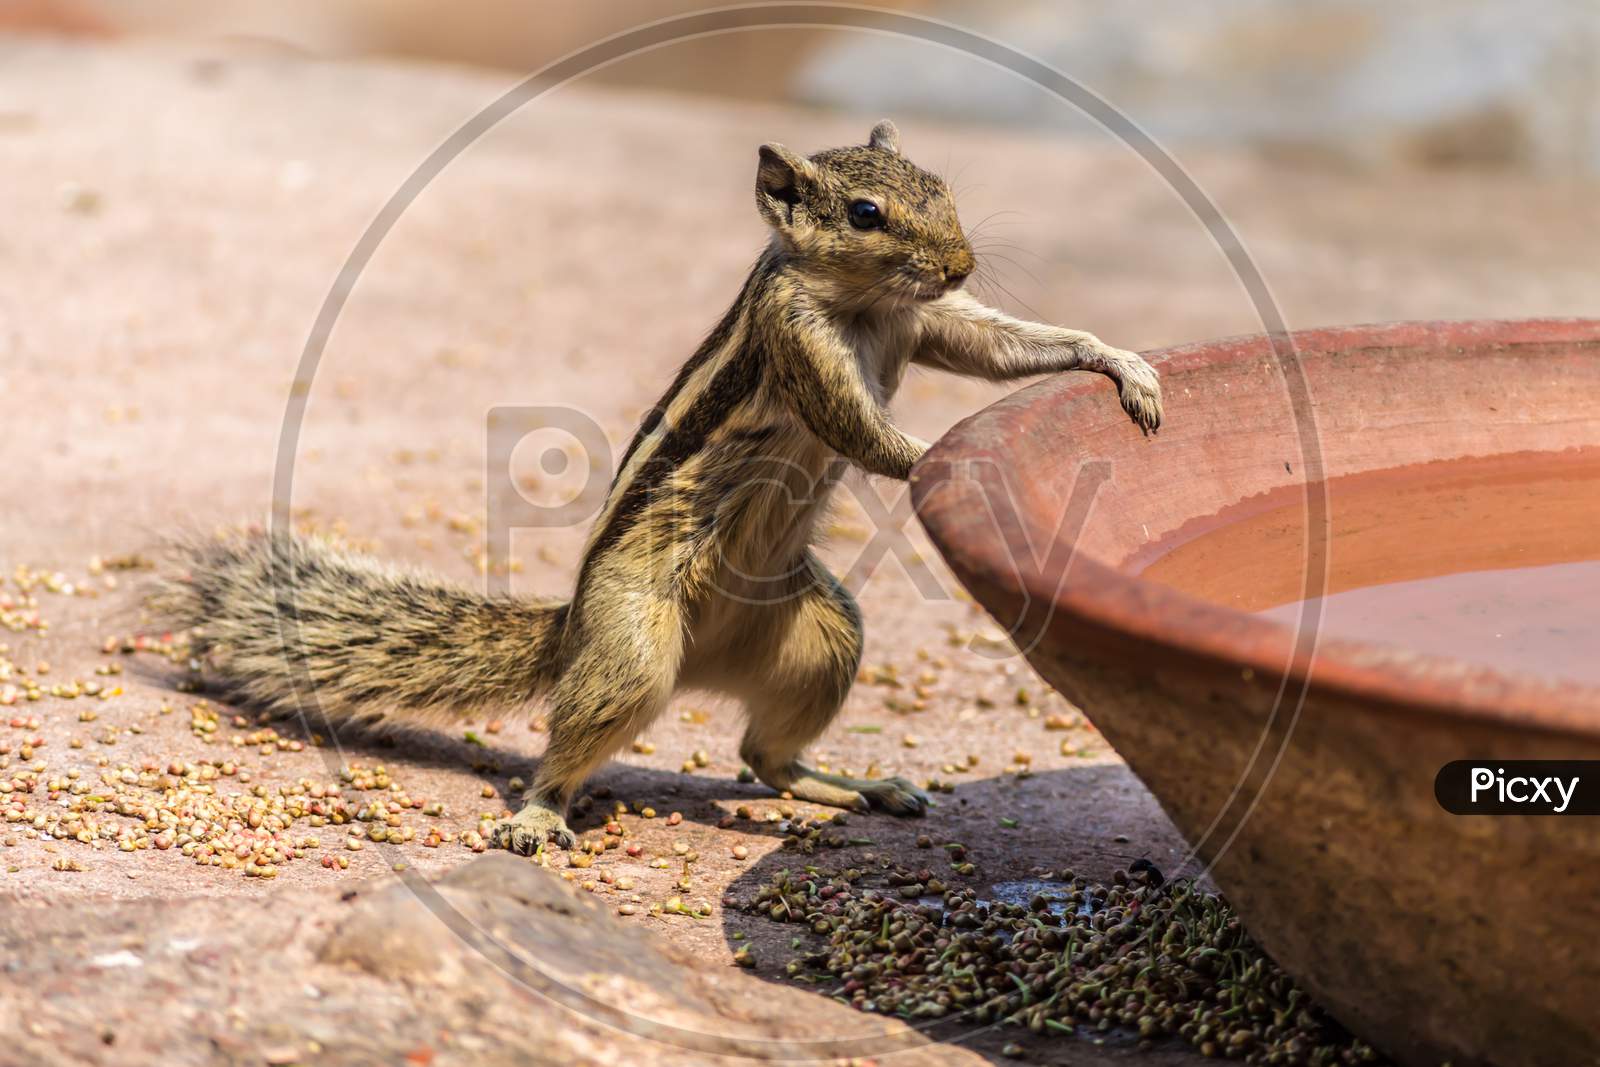 squirrel with hand on jar